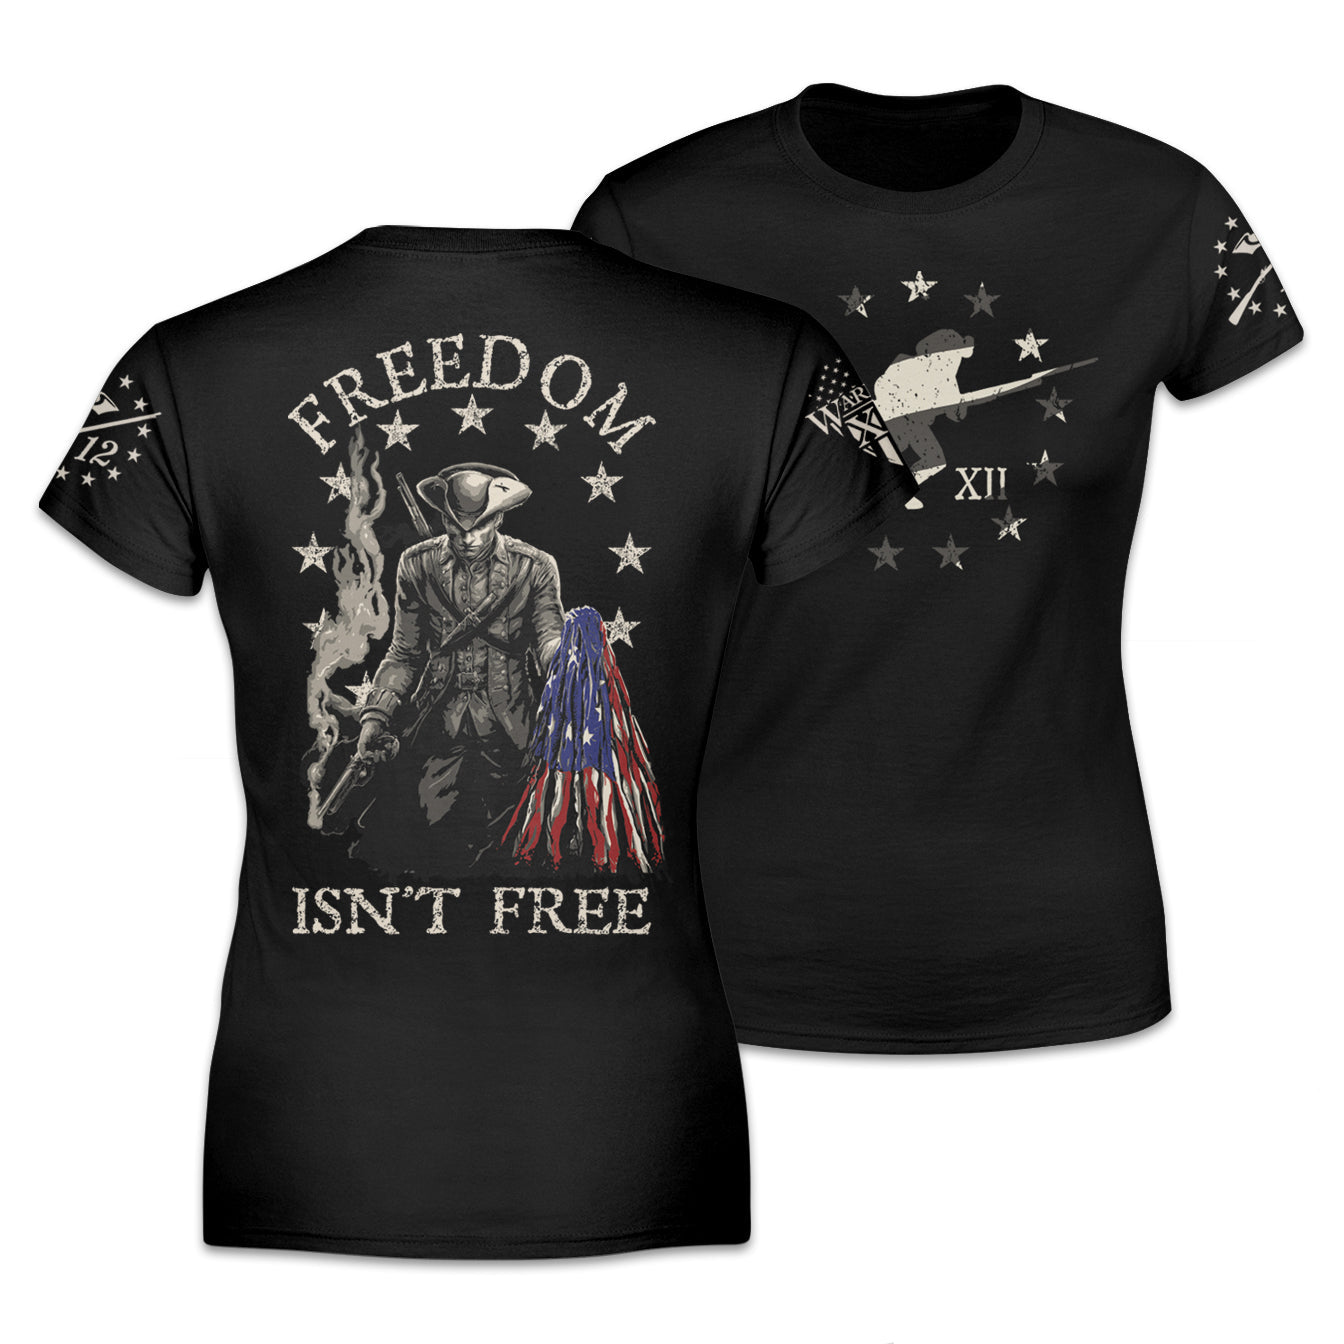 Freedom Isn't Free - Women's Relaxed Fit